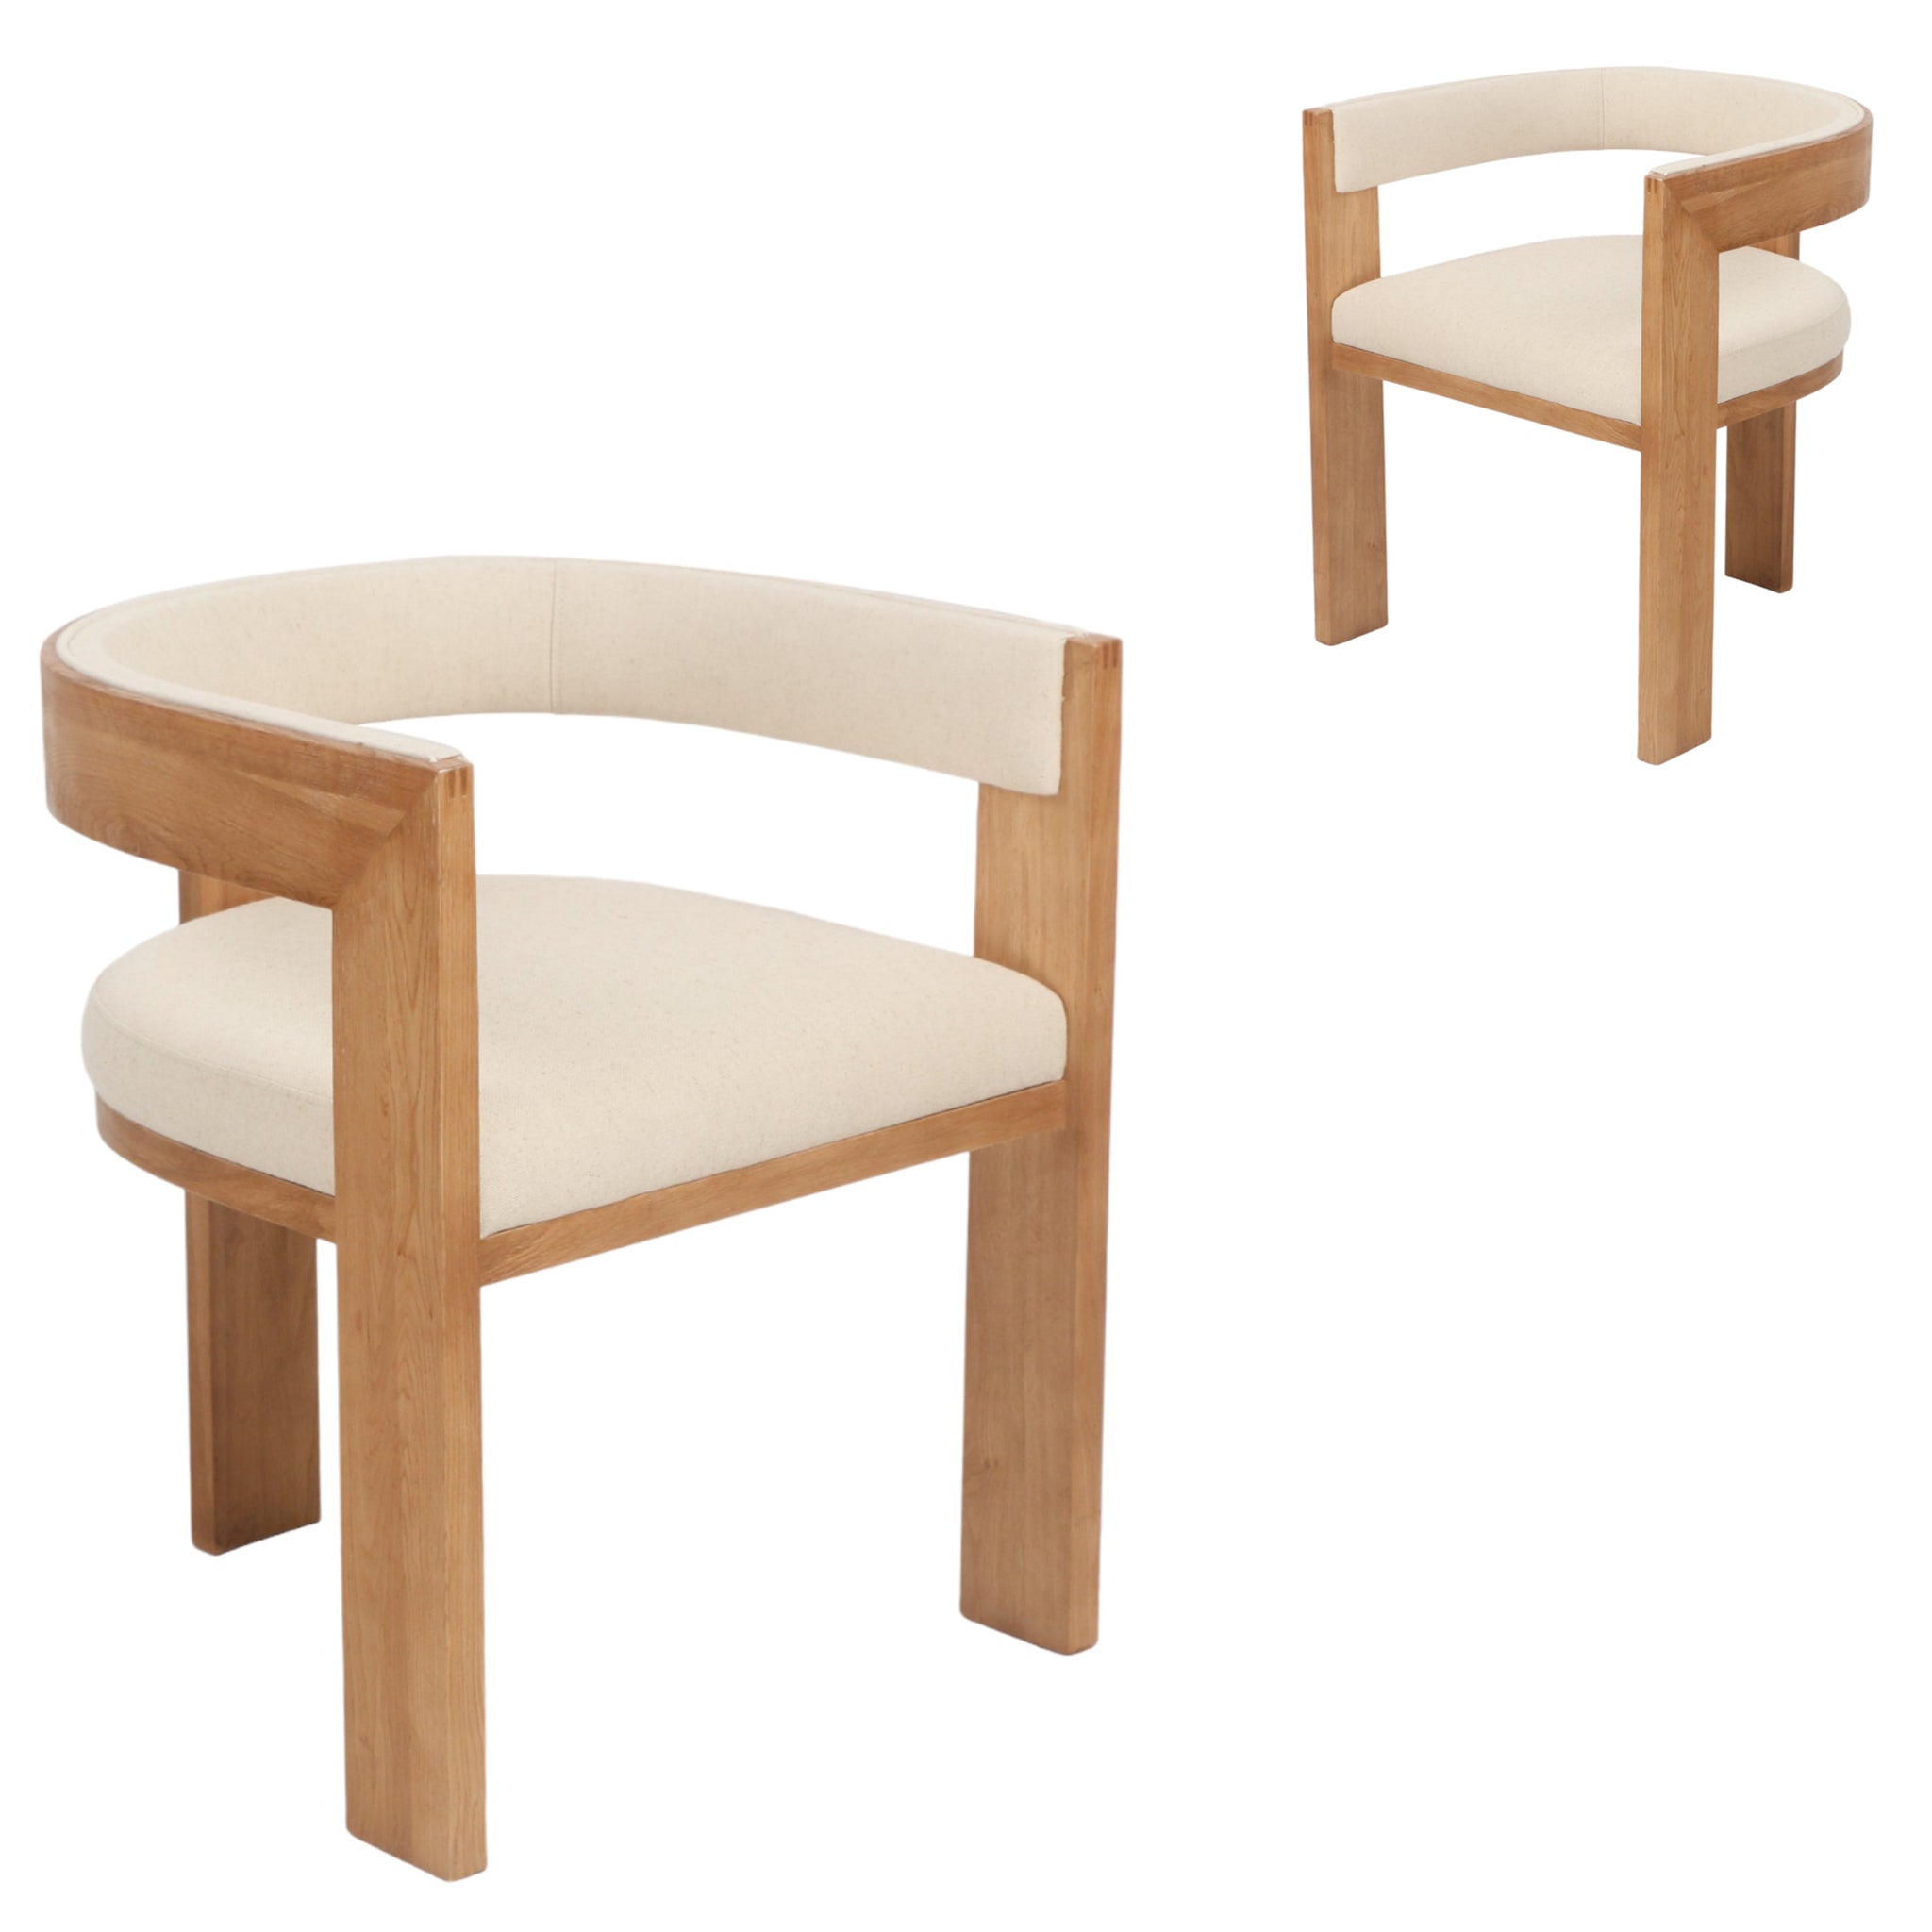 Set of 2 Elise Elm Dining Chair - Light Beige - Dining Chairs